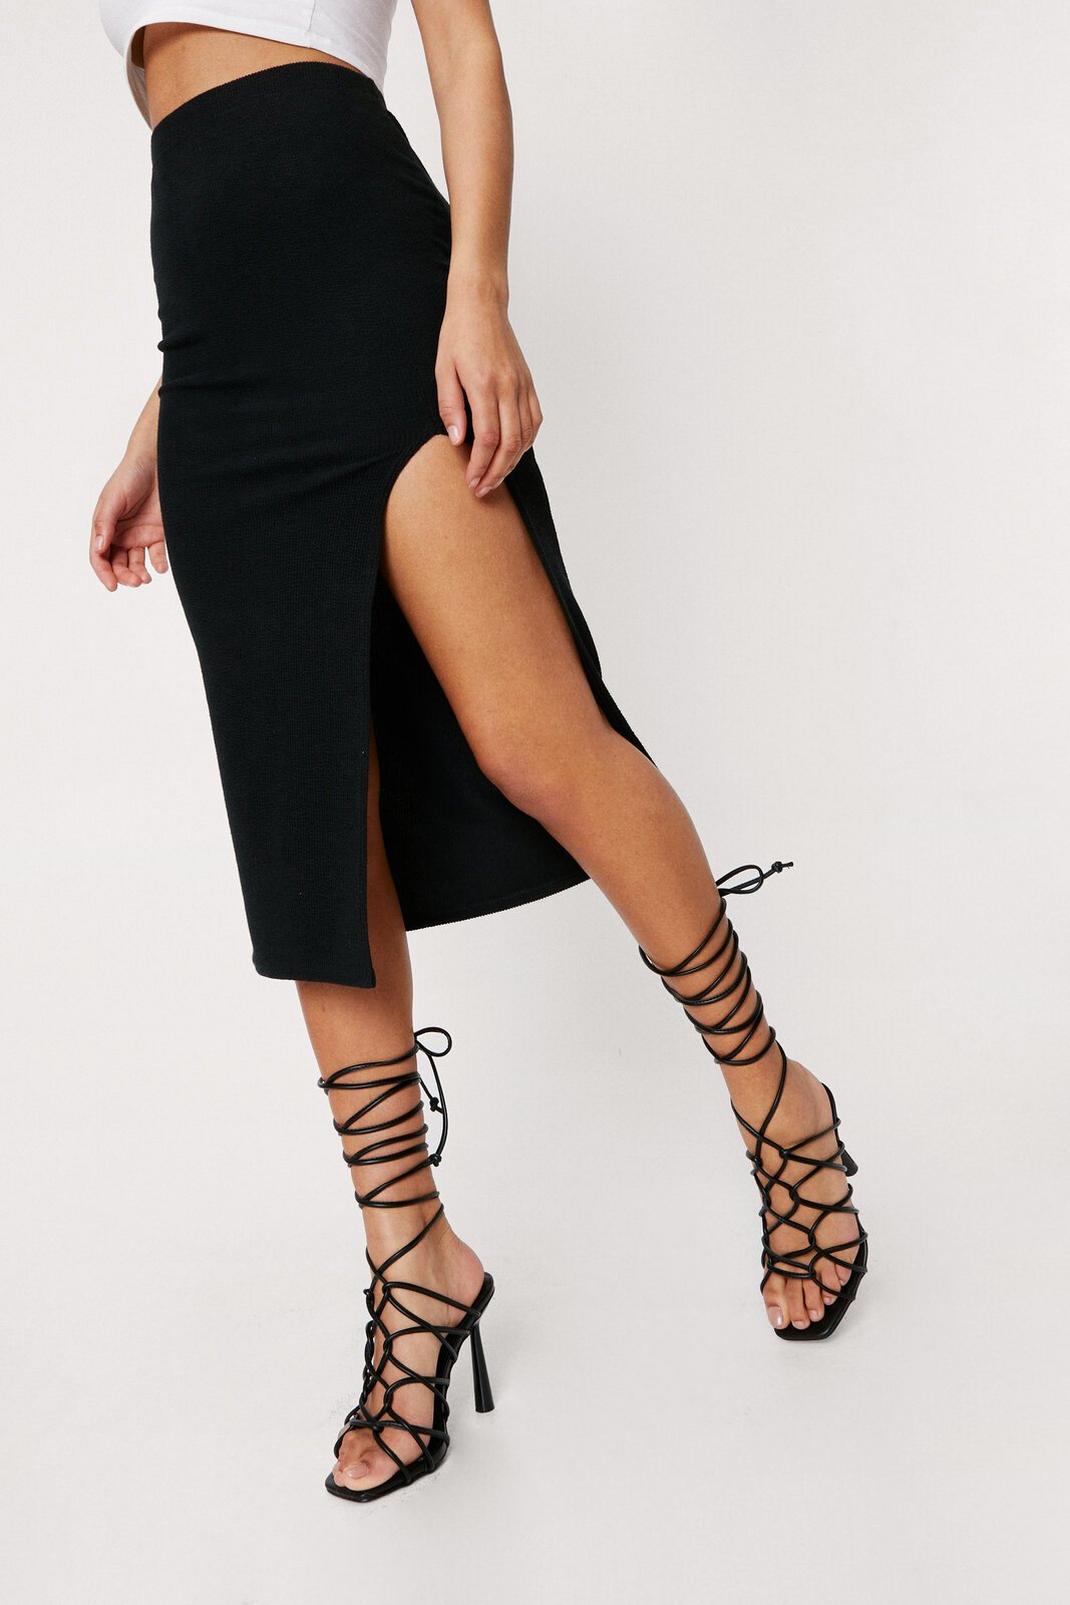 Black Strappy High Ankle Open Toe Stiletto Heels image number 1